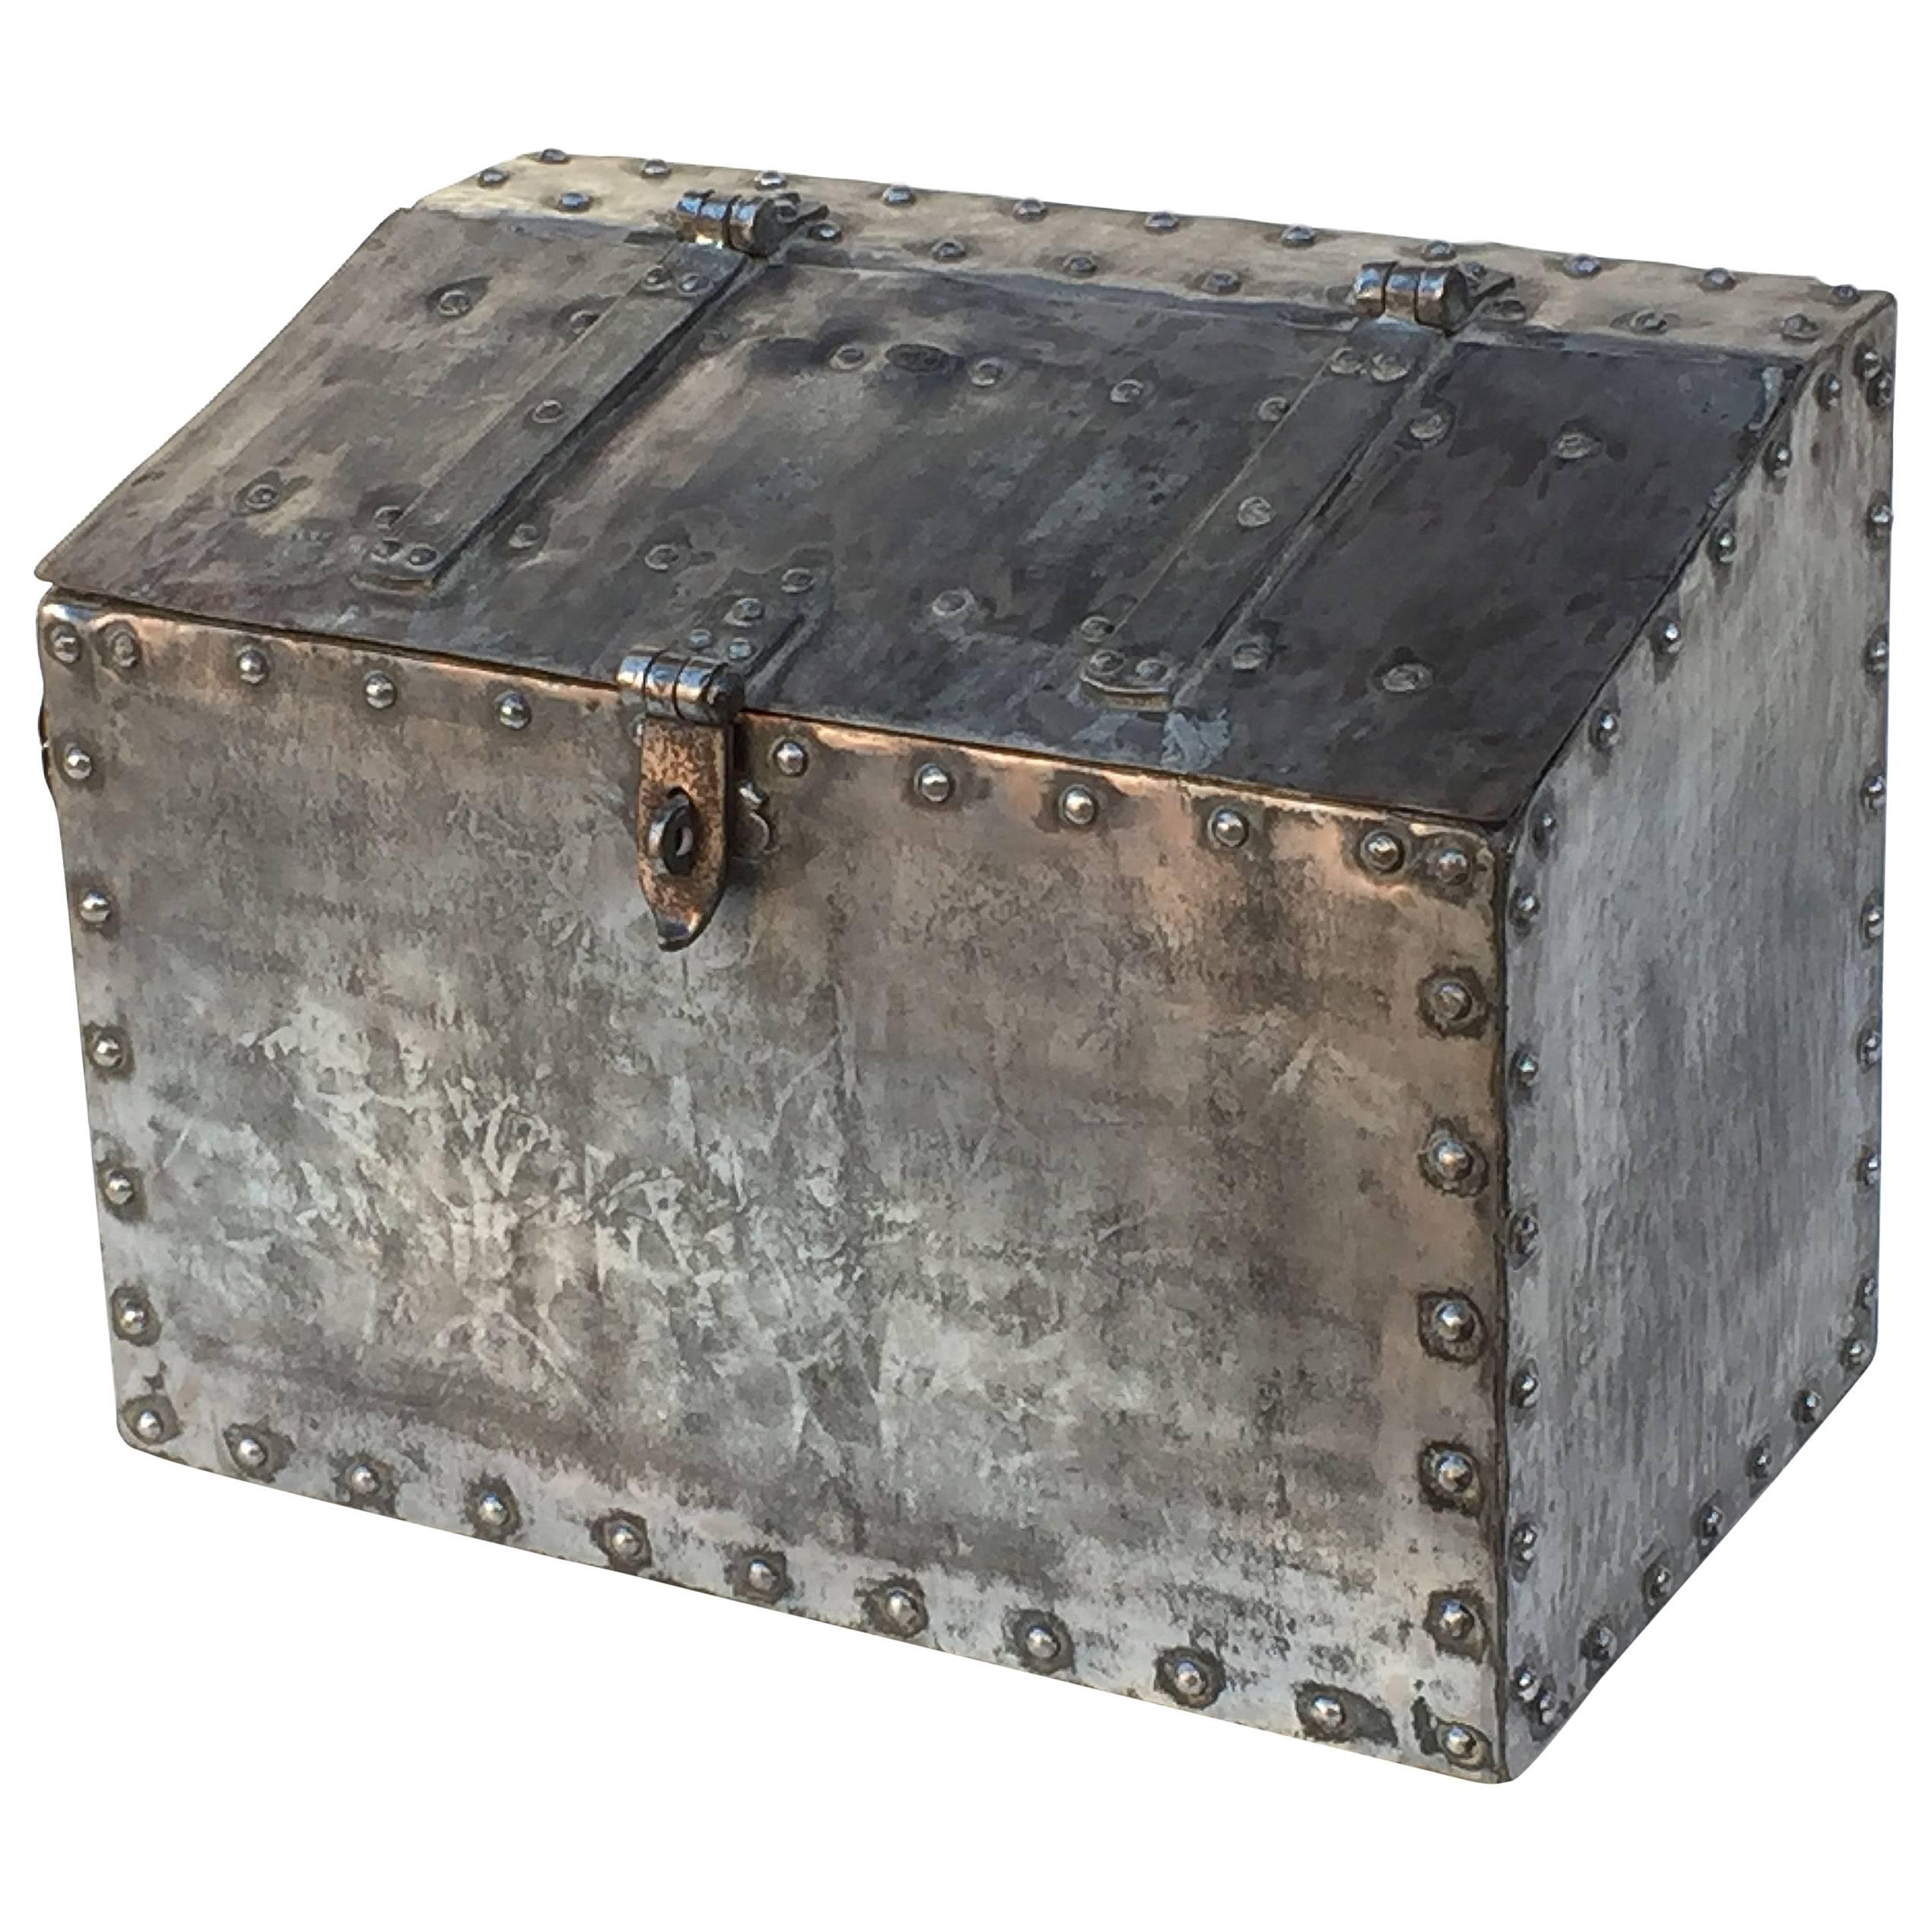 Large English Trunk of Polished Iron from the 19th Century